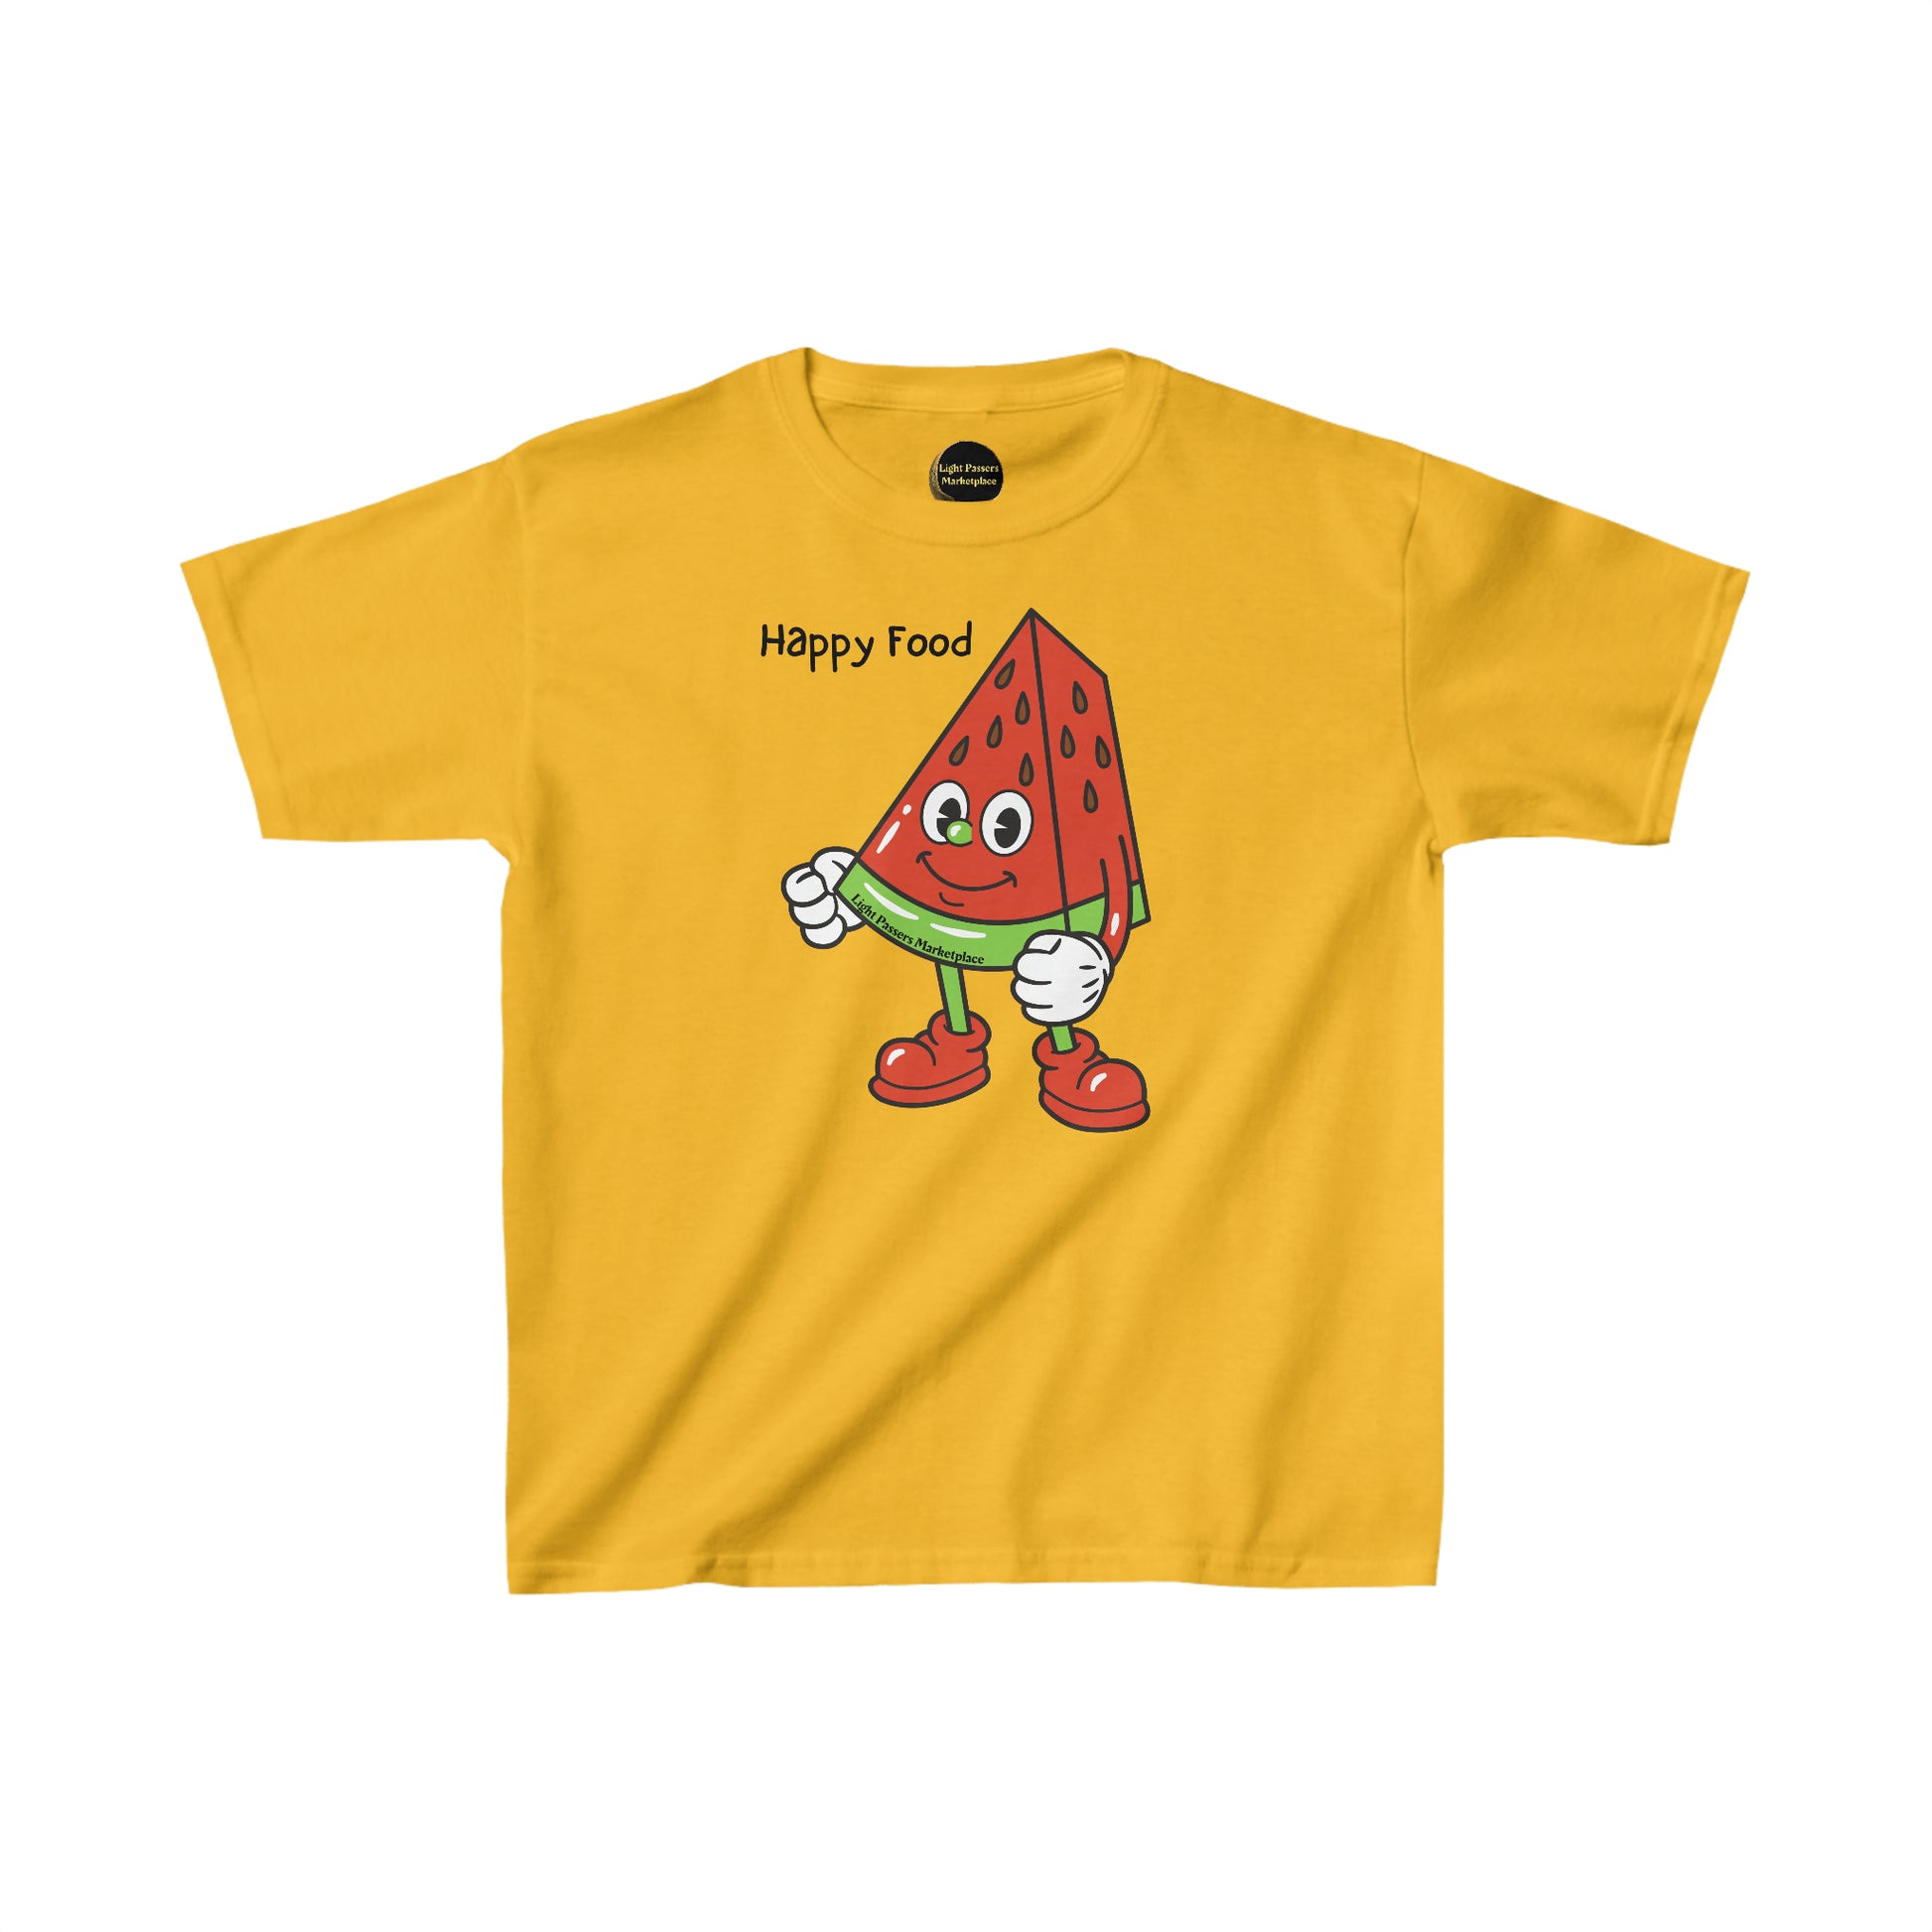 Youth yellow t-shirt featuring a cartoon watermelon character, ideal for everyday wear. Made with 100% cotton for solid colors, with twill tape shoulders for durability and ribbed collar for curl resistance. Ethically sourced US cotton.